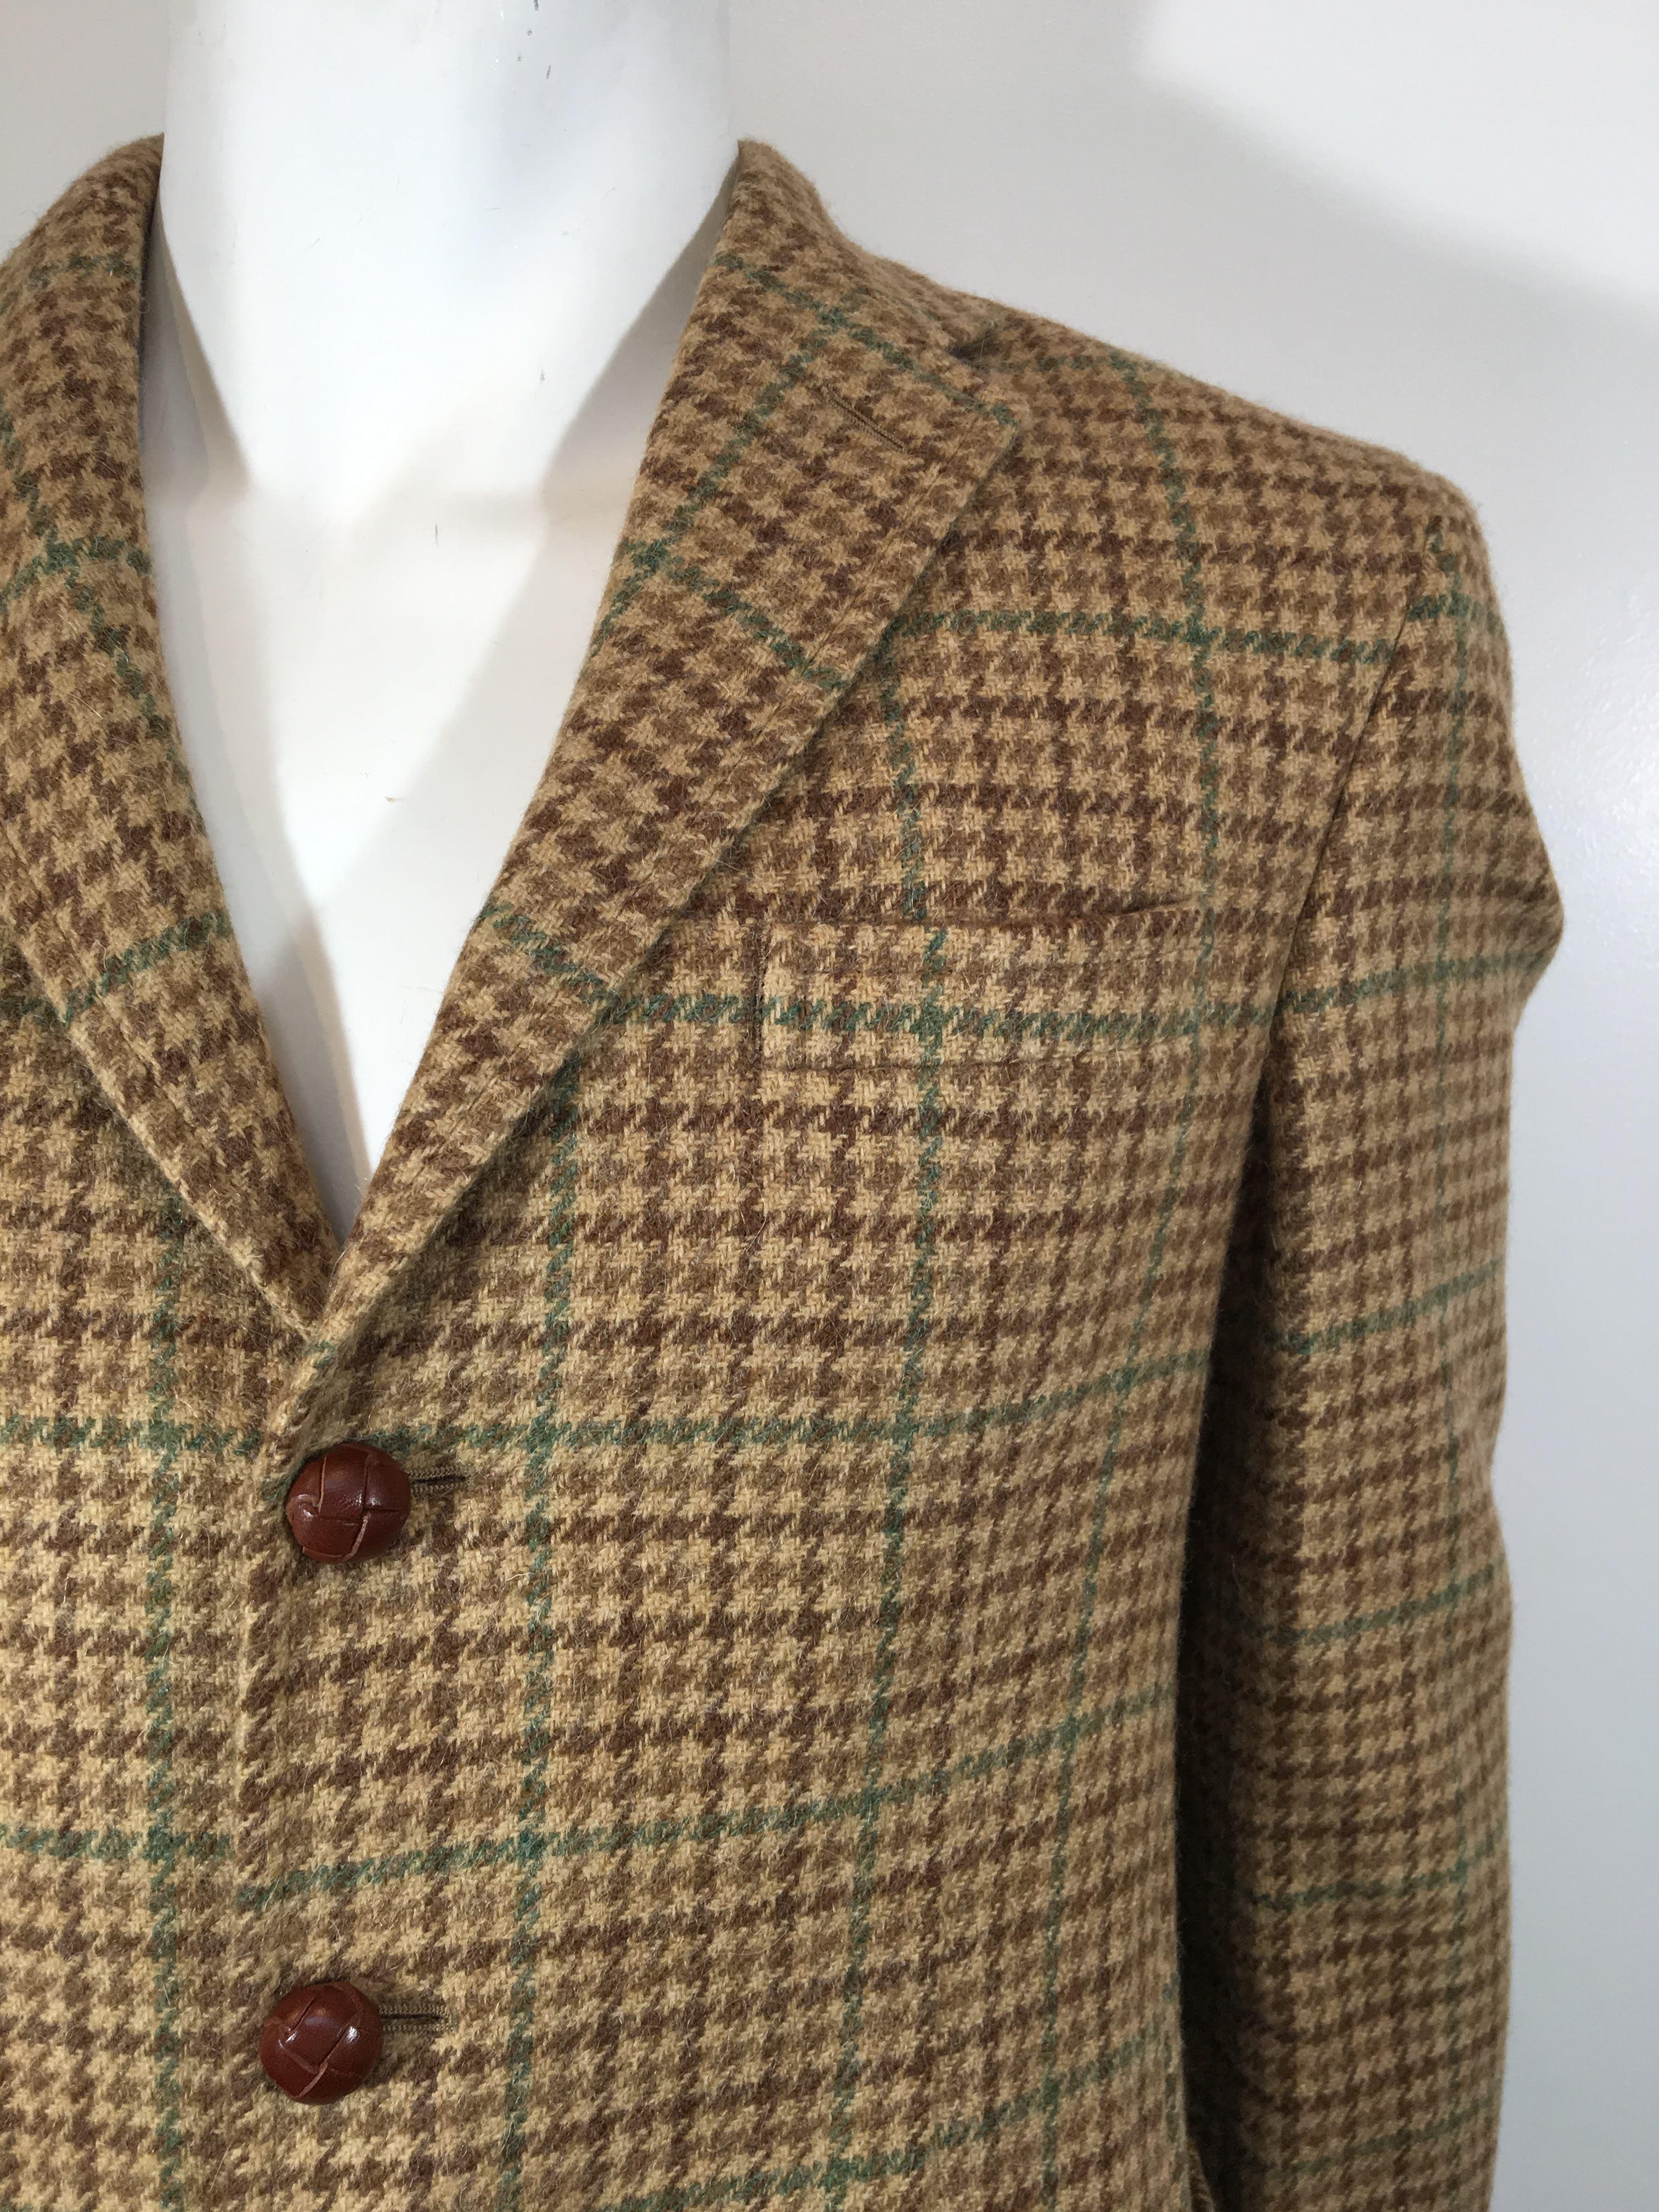 Men's Polo by Ralph Lauren wool / alpaca tan blazer with houndstooth pattern and 3 leather buttons. 